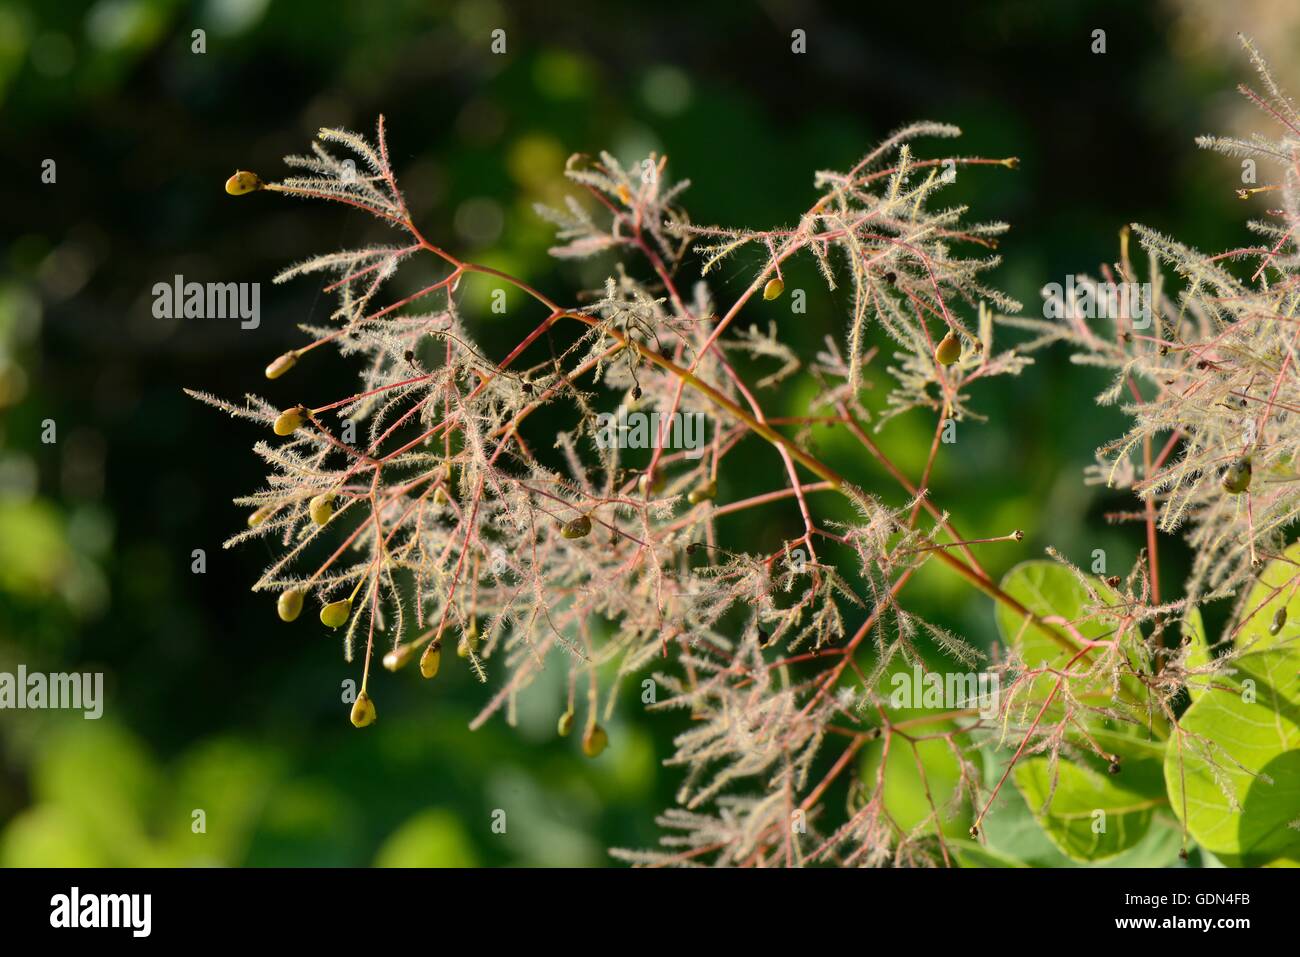 European smoketree / Dyer's sumach (Cotinus coggygria) feathery infructescence with developing drupes, Bosnia and Herzegovina. Stock Photo